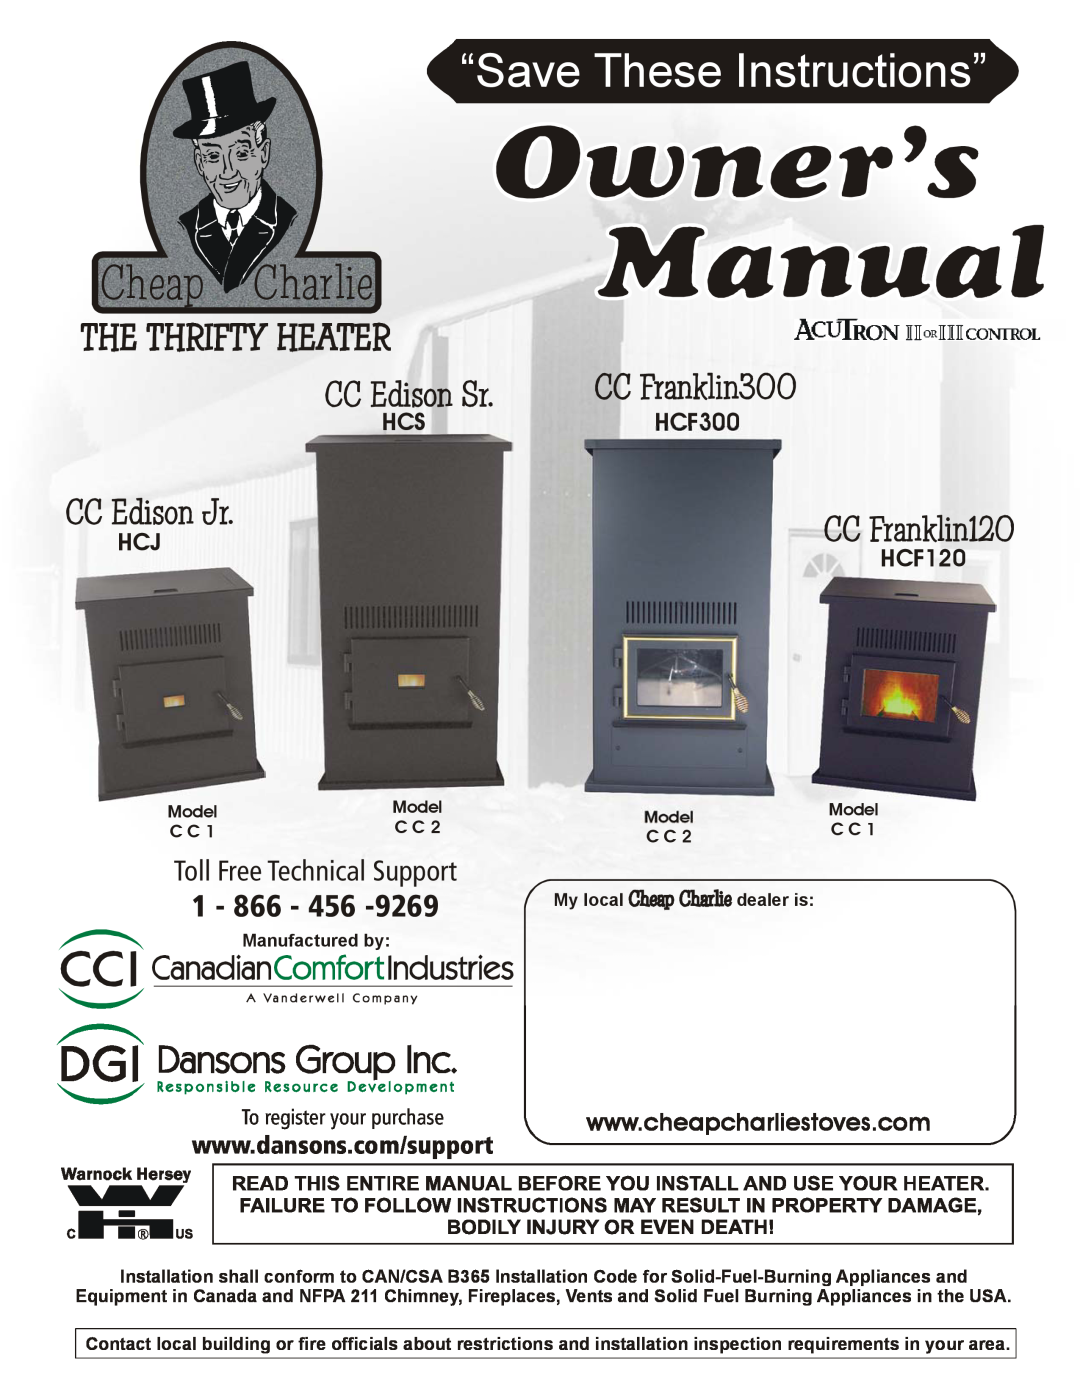 Dansons Group HCJ manual HCSHCF300, To register your purchase, Cheap Charlie, “Save These Instructions”, 1 - 866 - 456 